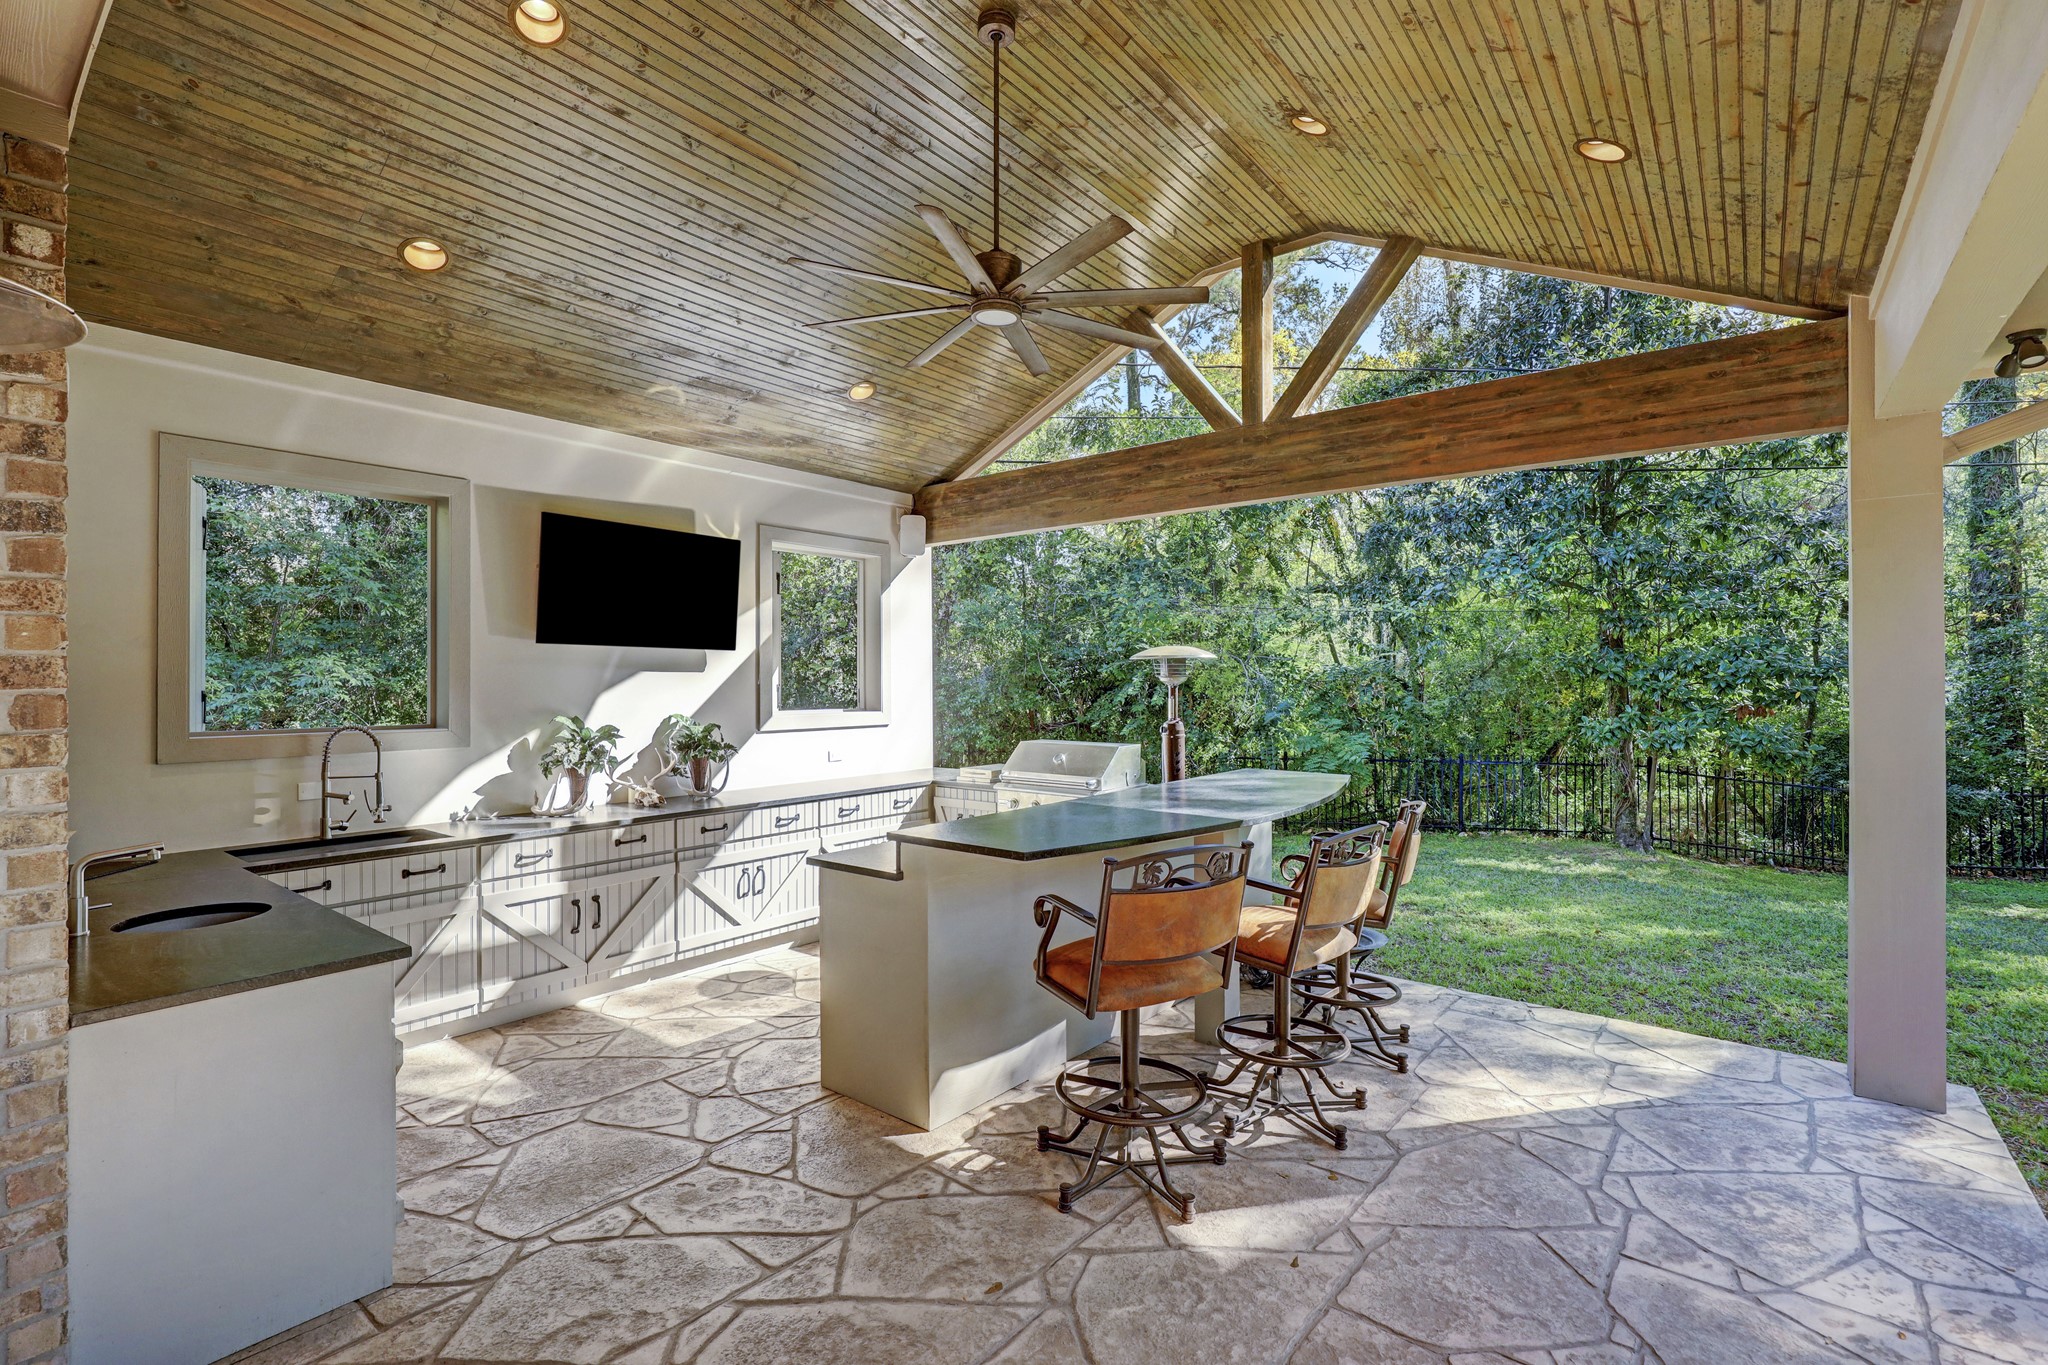 Large covered outdoor living area